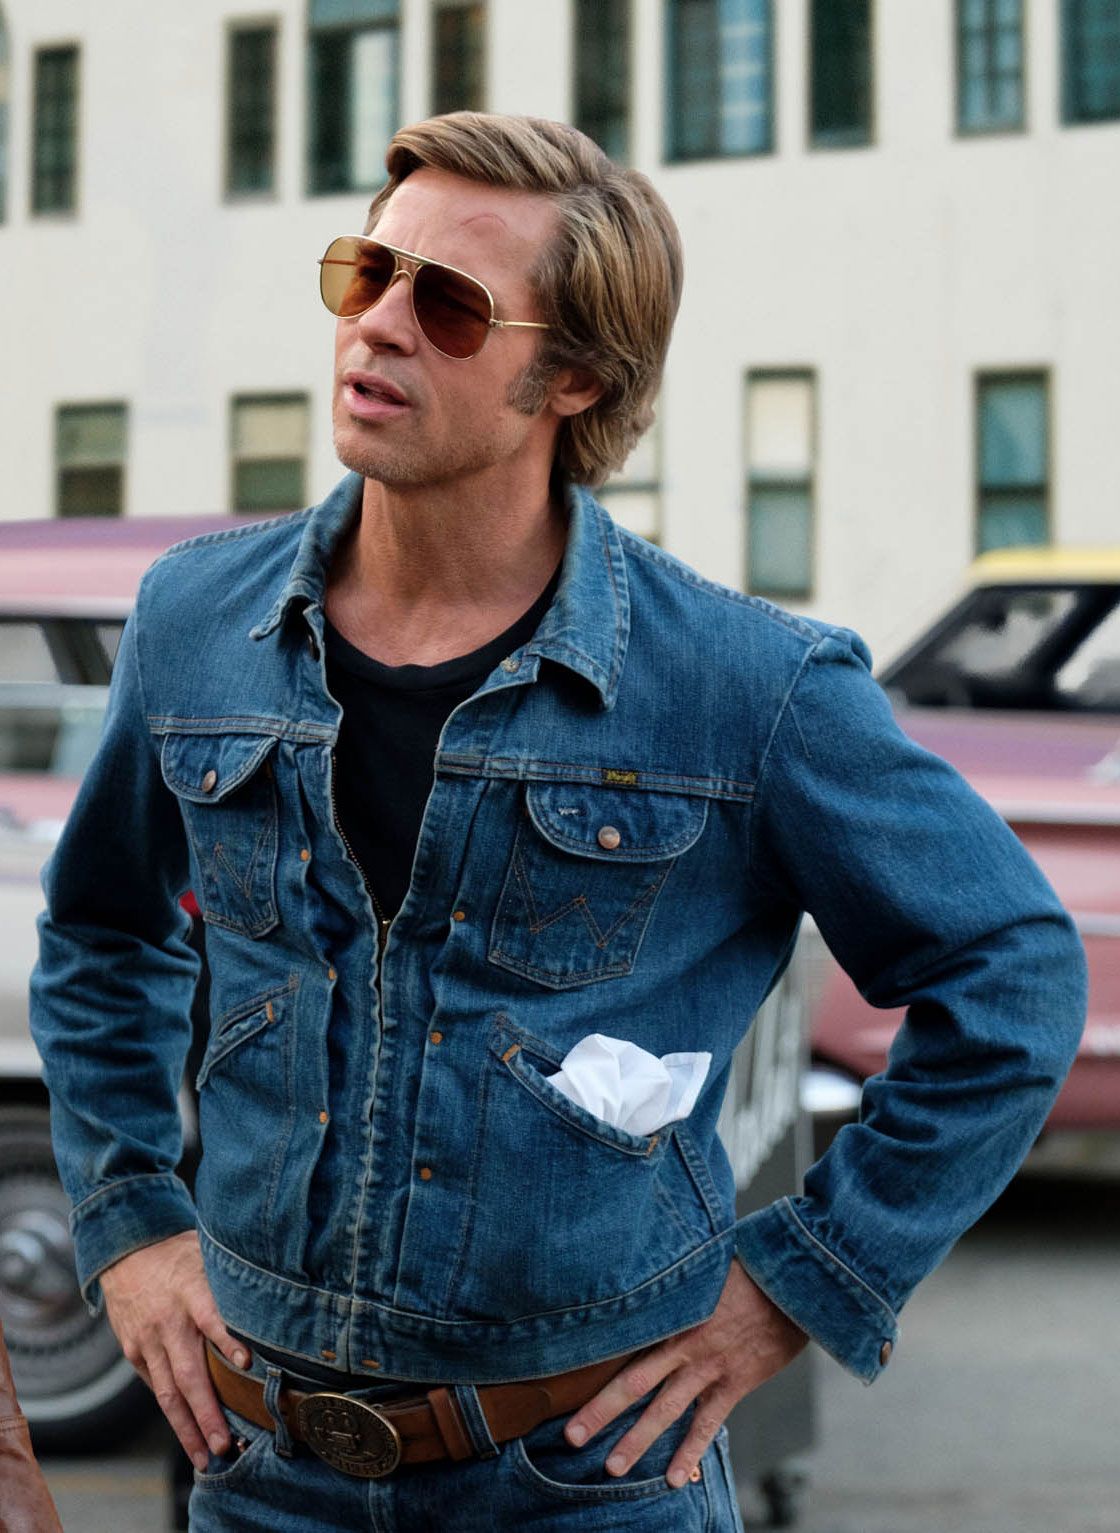 Buy Brad Pitt Once Upon a Time in Hollywood Cliff Booth Denim Jacket